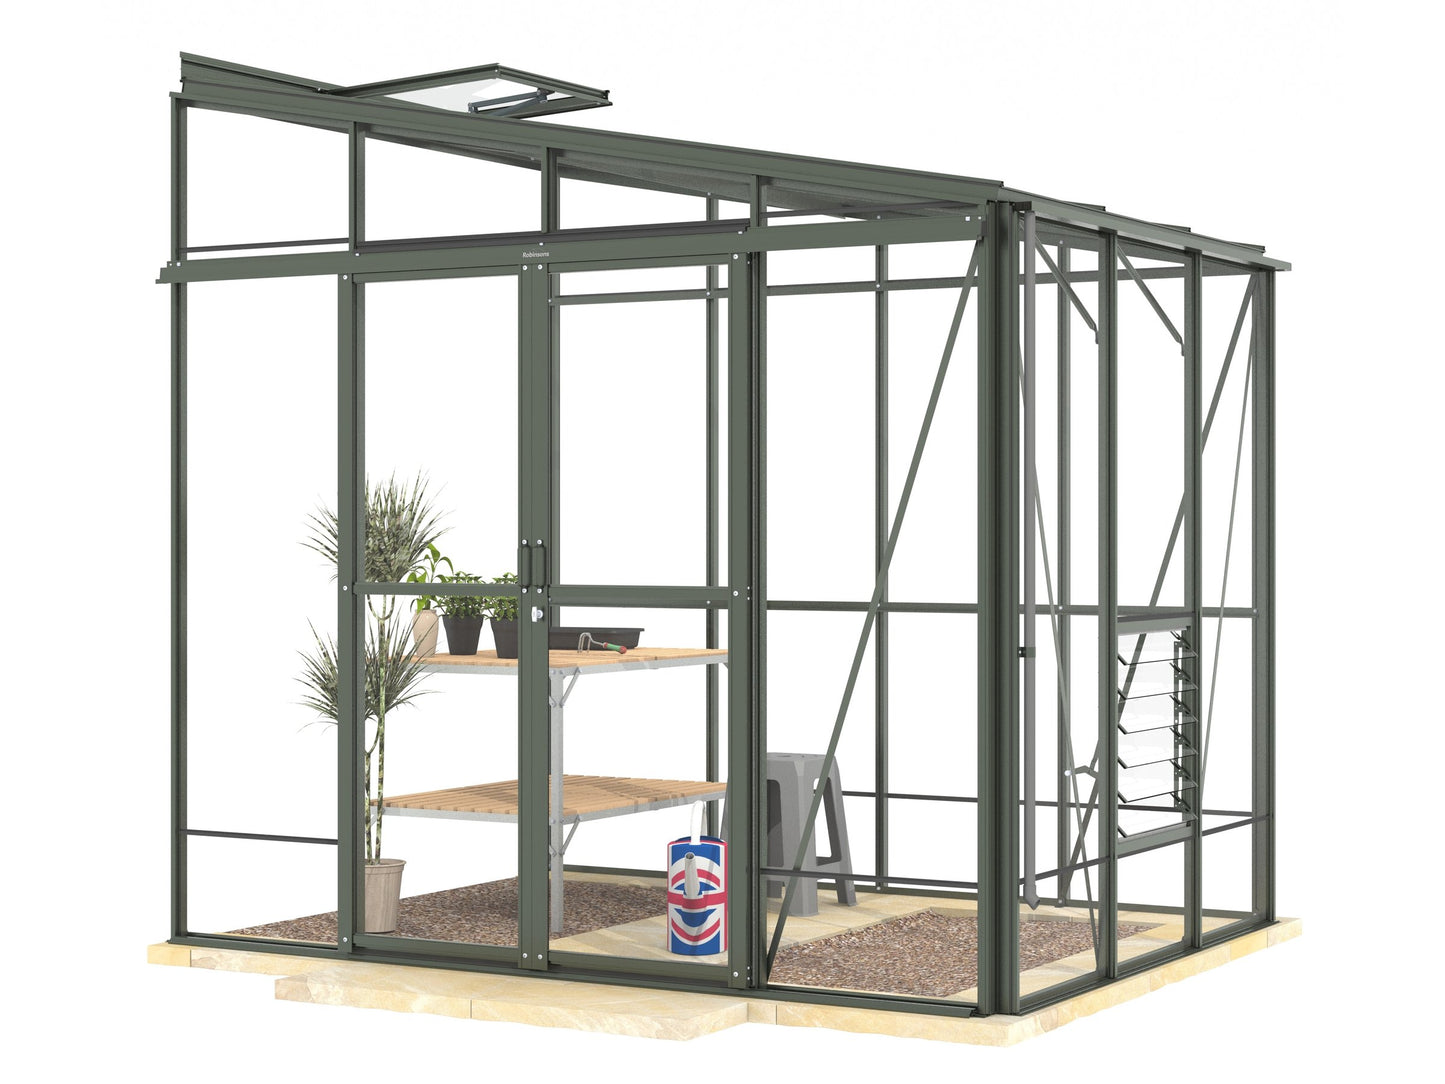 Robinsons 8ft wide LEAN-TO